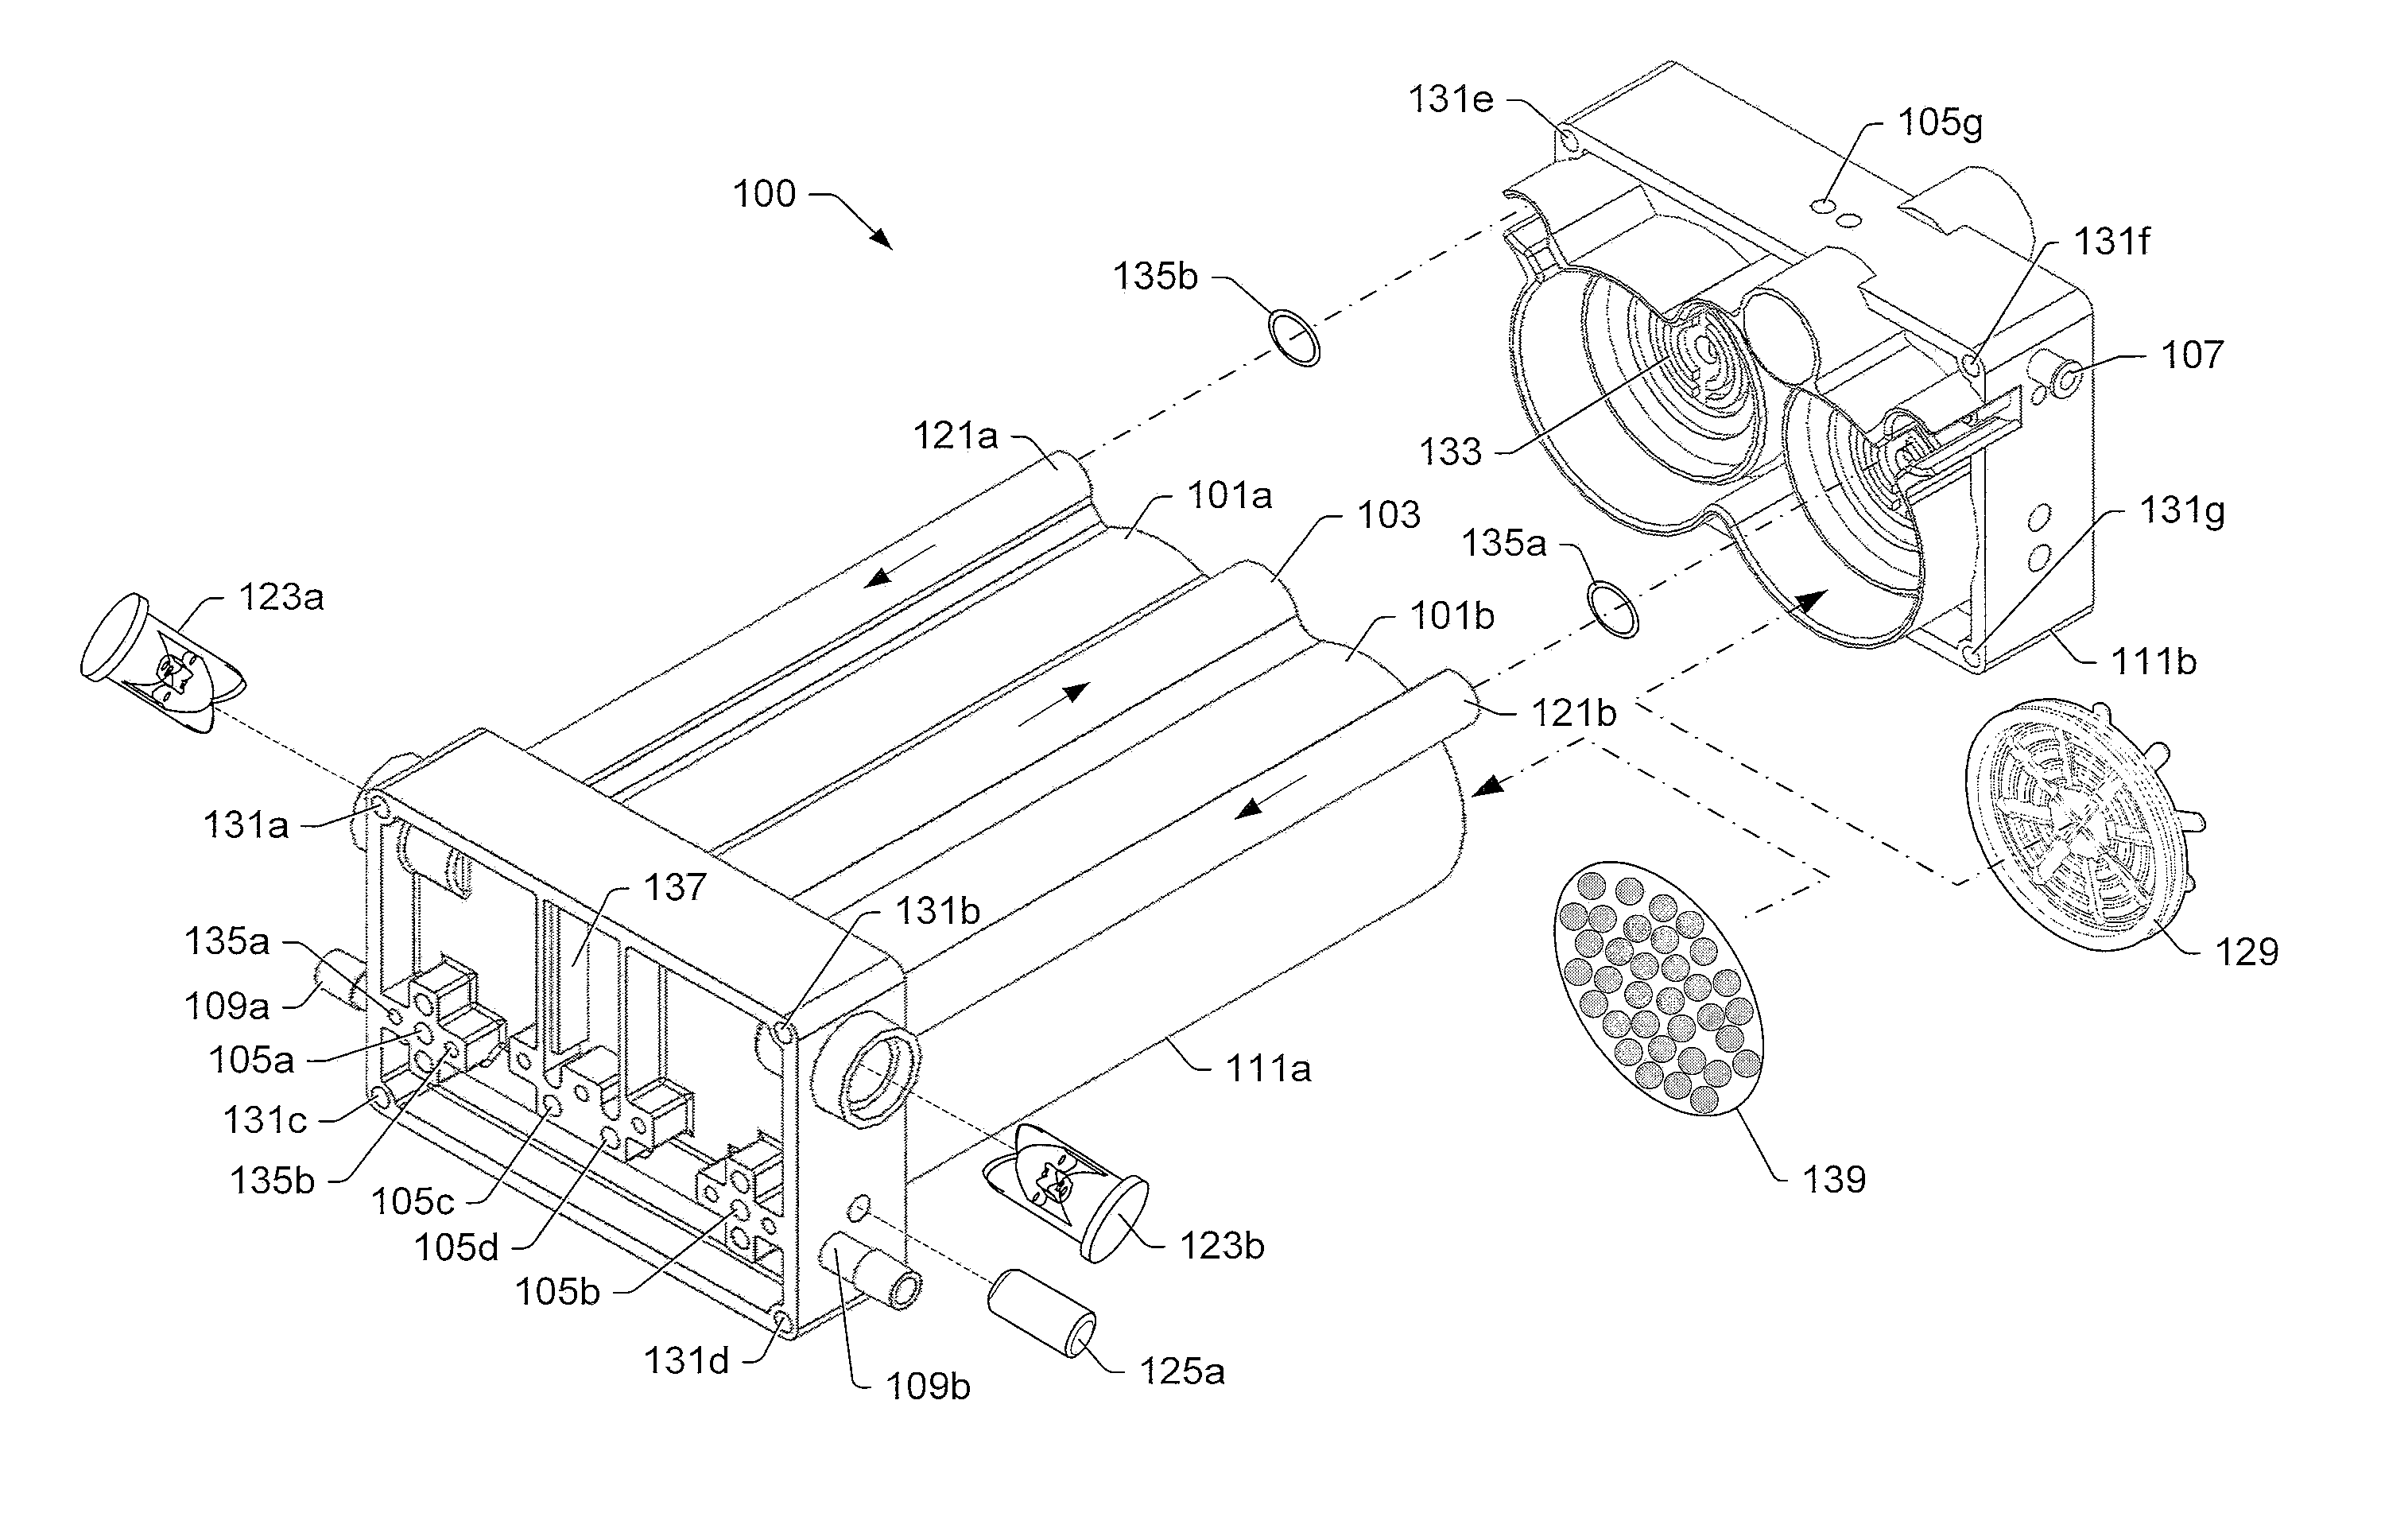 Oxygen concentrator apparatus and method of delivering pulses of oxygen